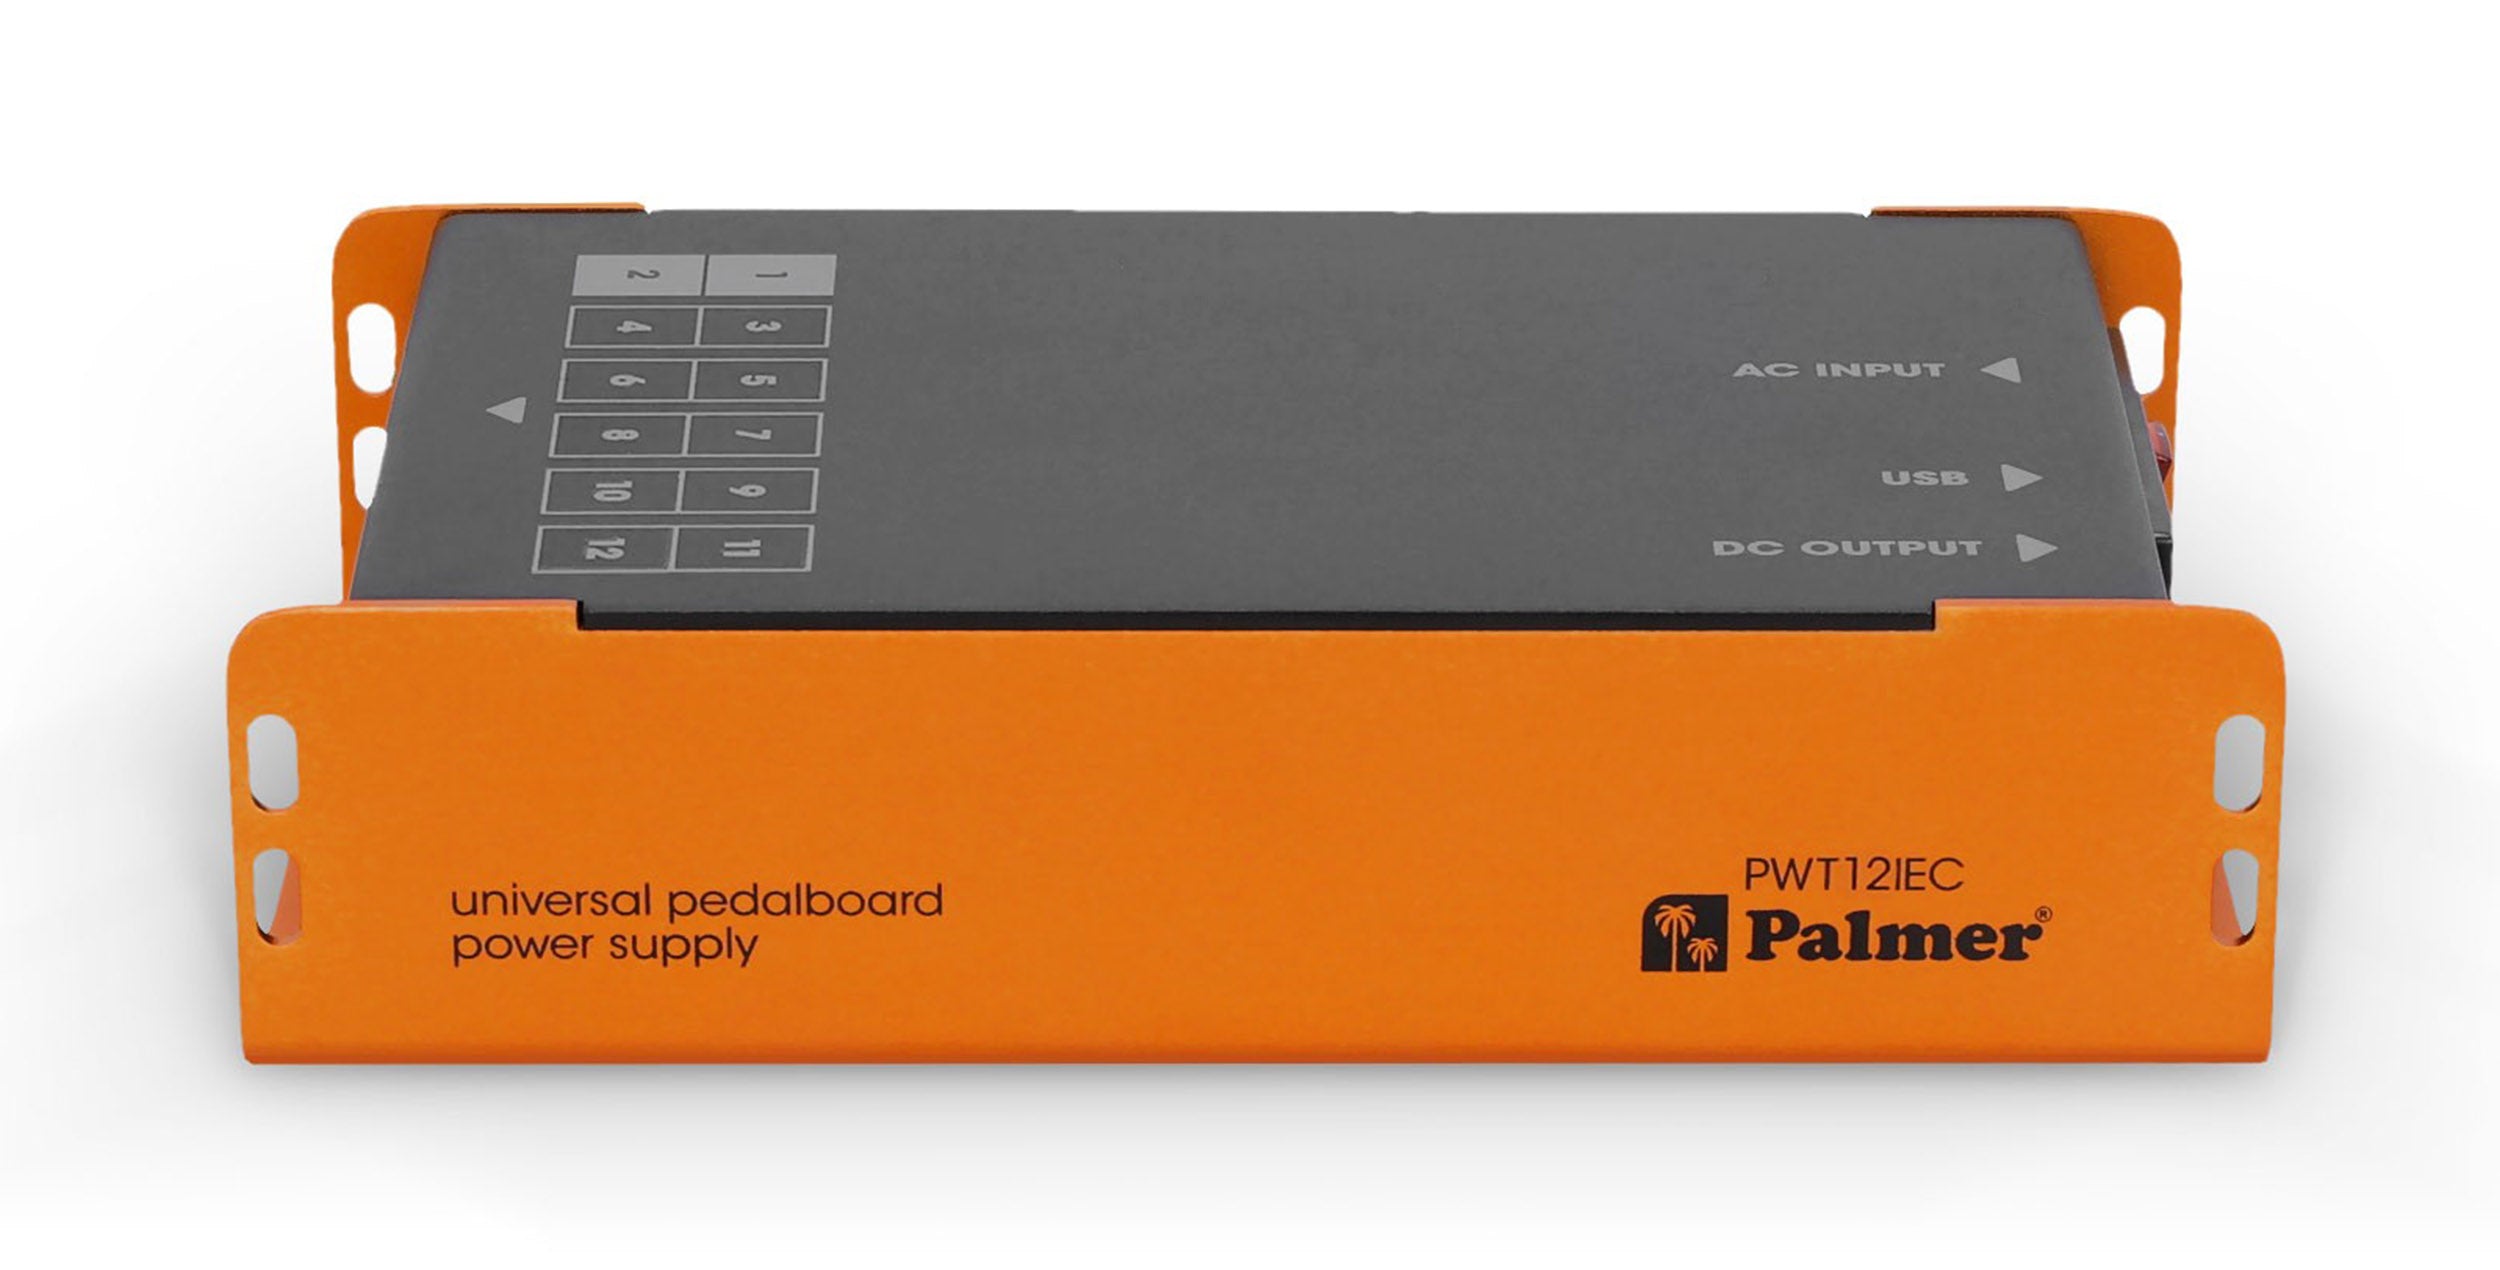 Palmer PWT 12 IEC, Universal Pedalboard Power Supply with USB by Palmer